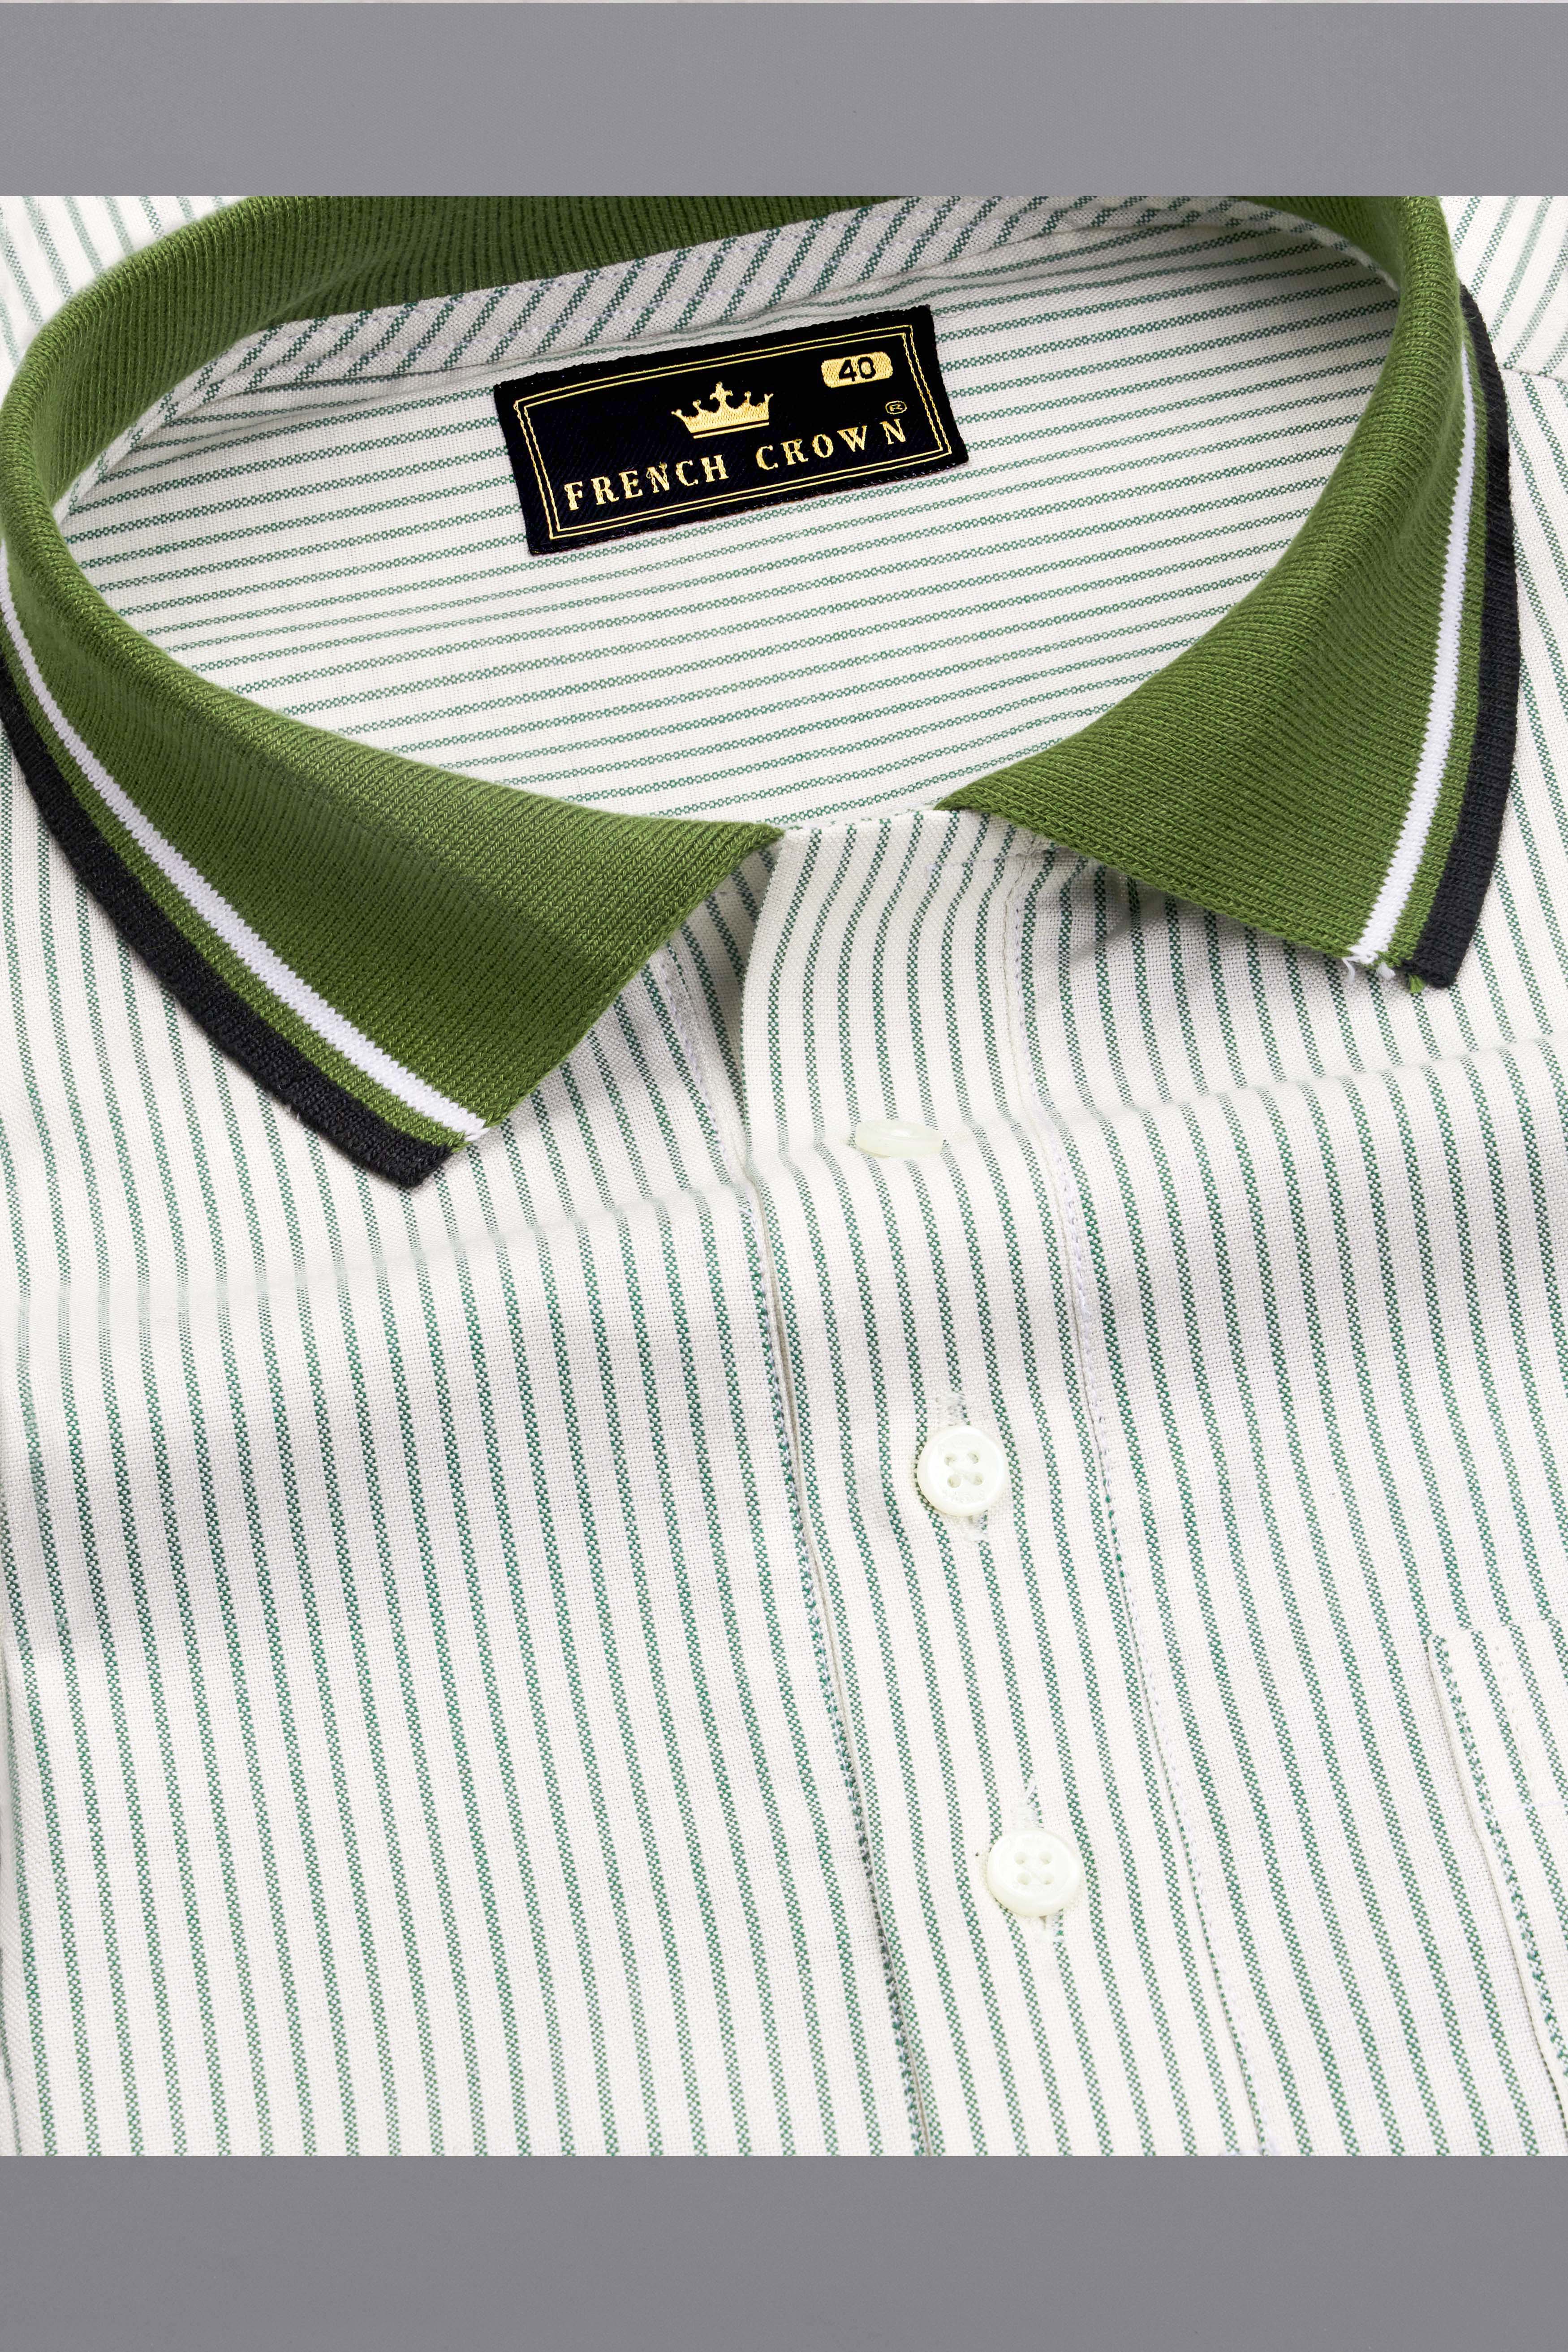 Bright White with Lunar Green Striped Royal Oxford Designer Polo with Embroidered Work on Pocket